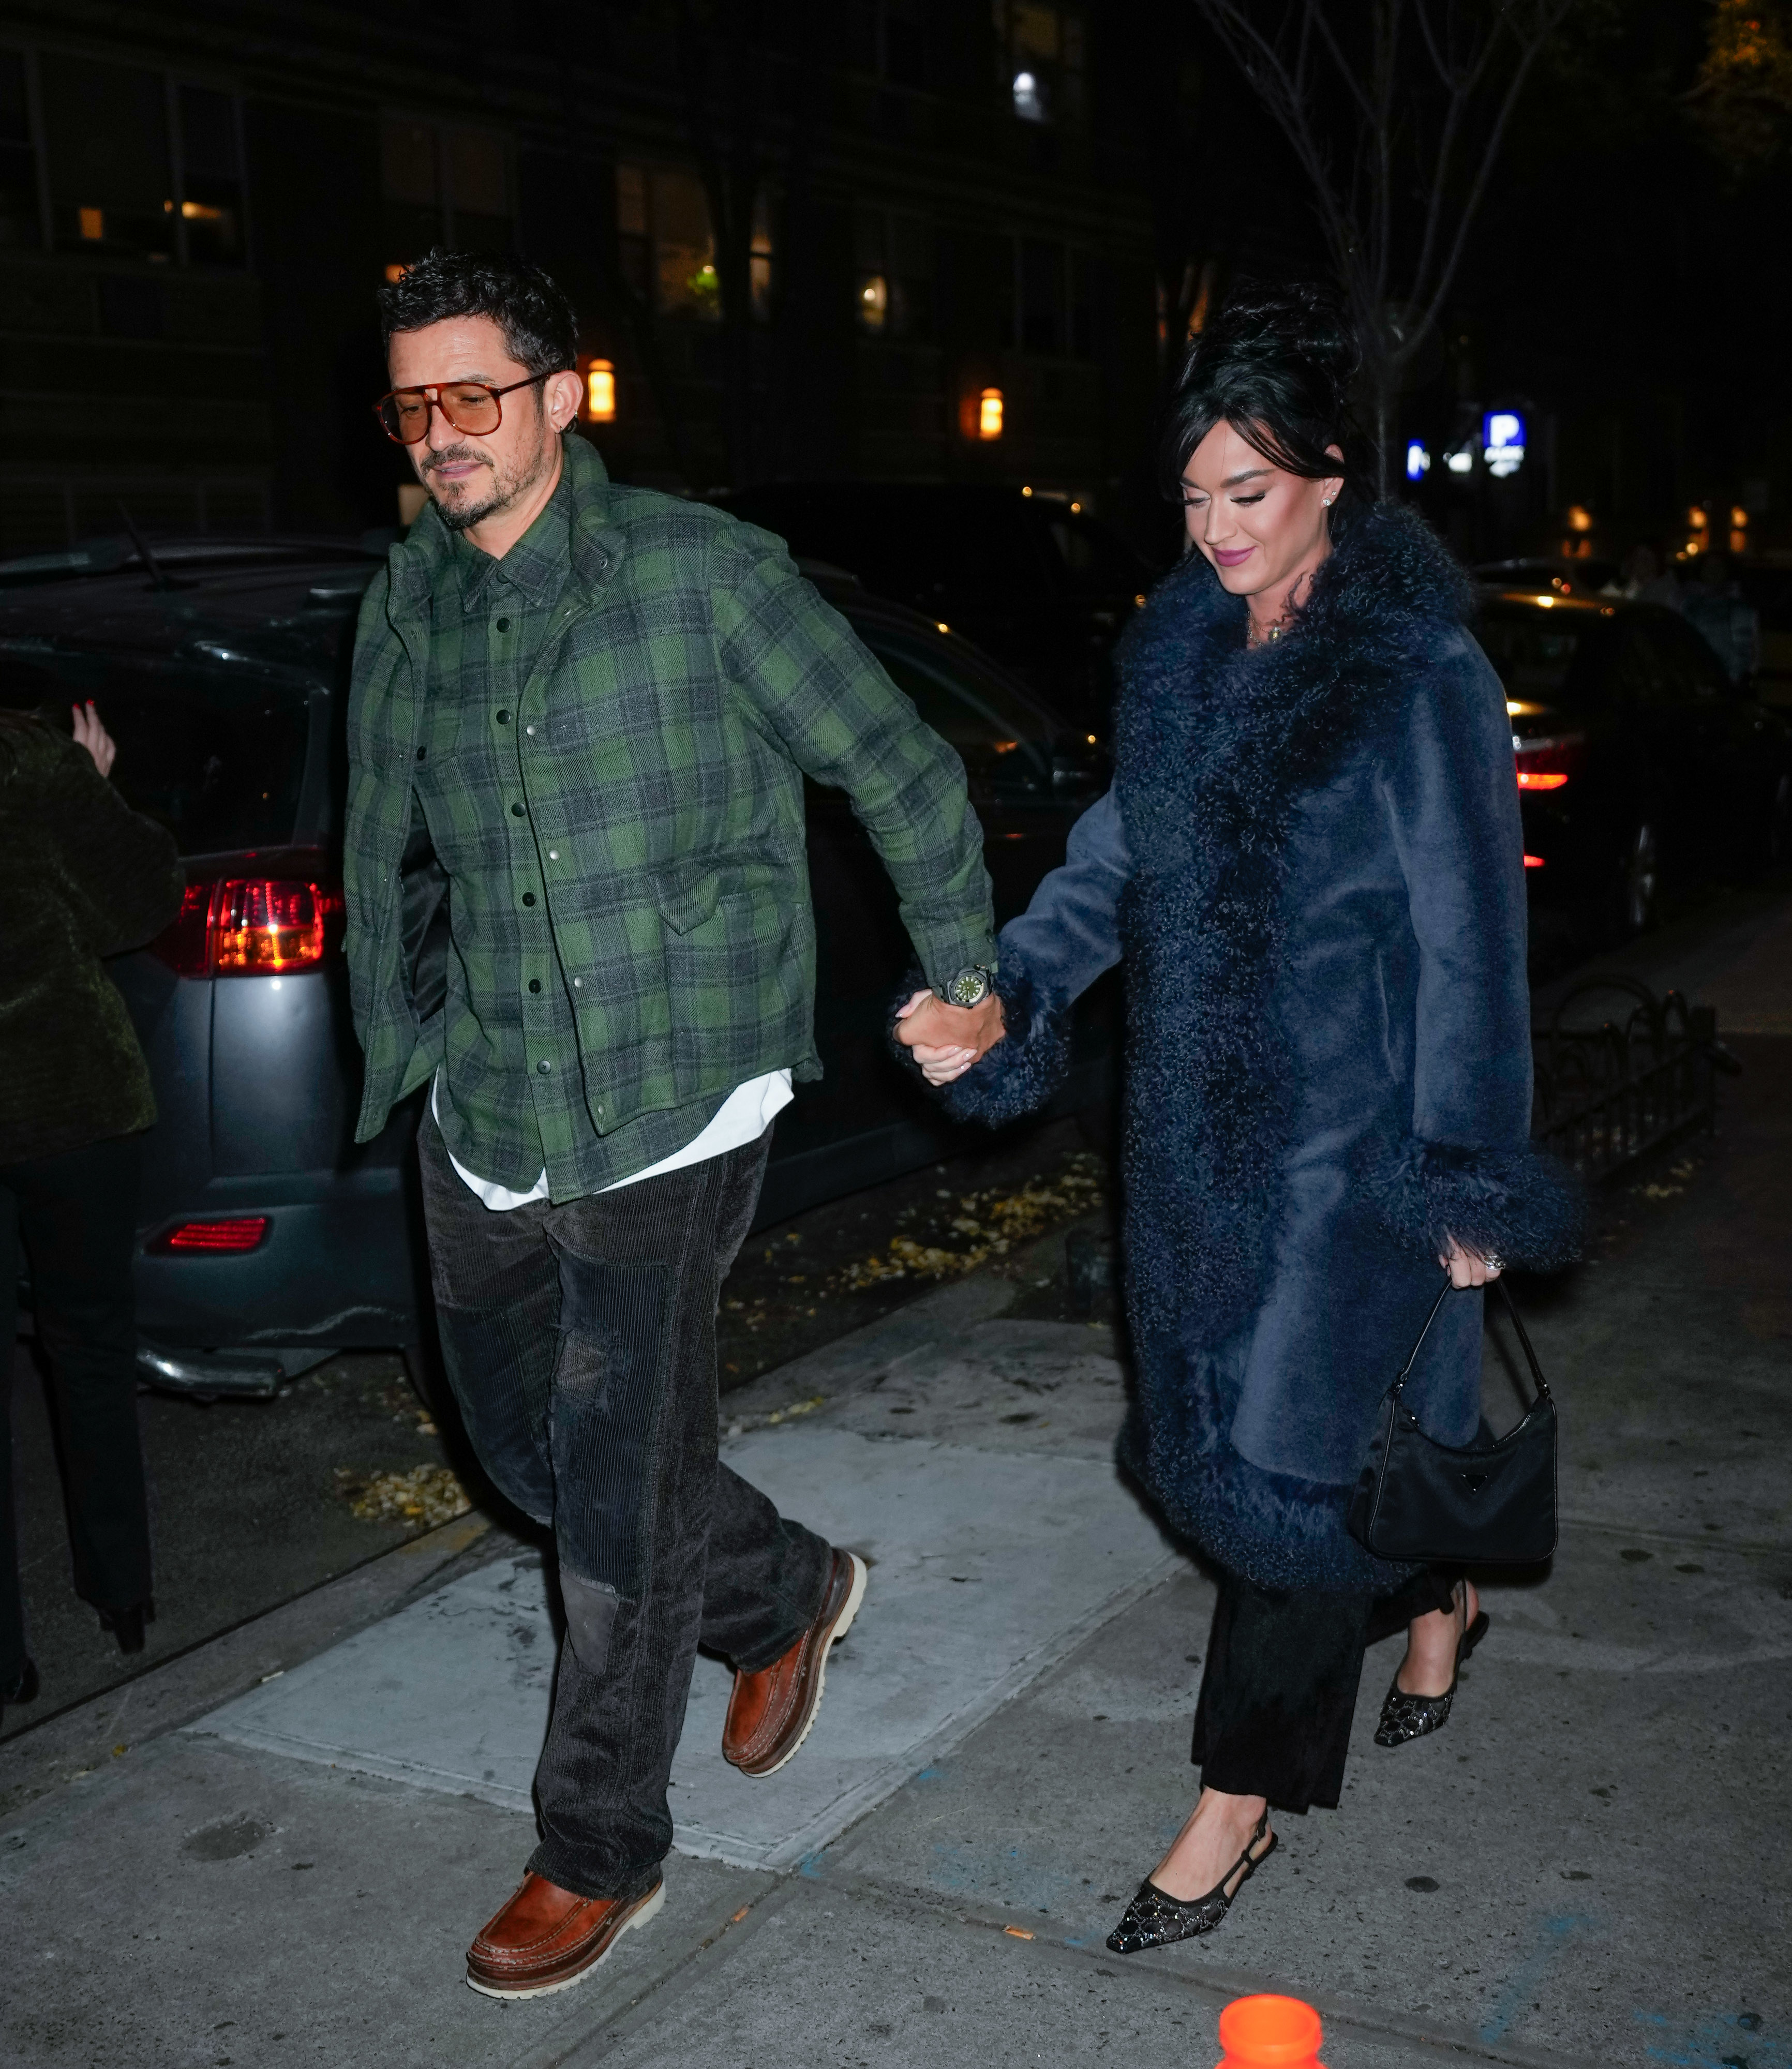 Orlando Bloom and Katy Perry walking hand in hand at night